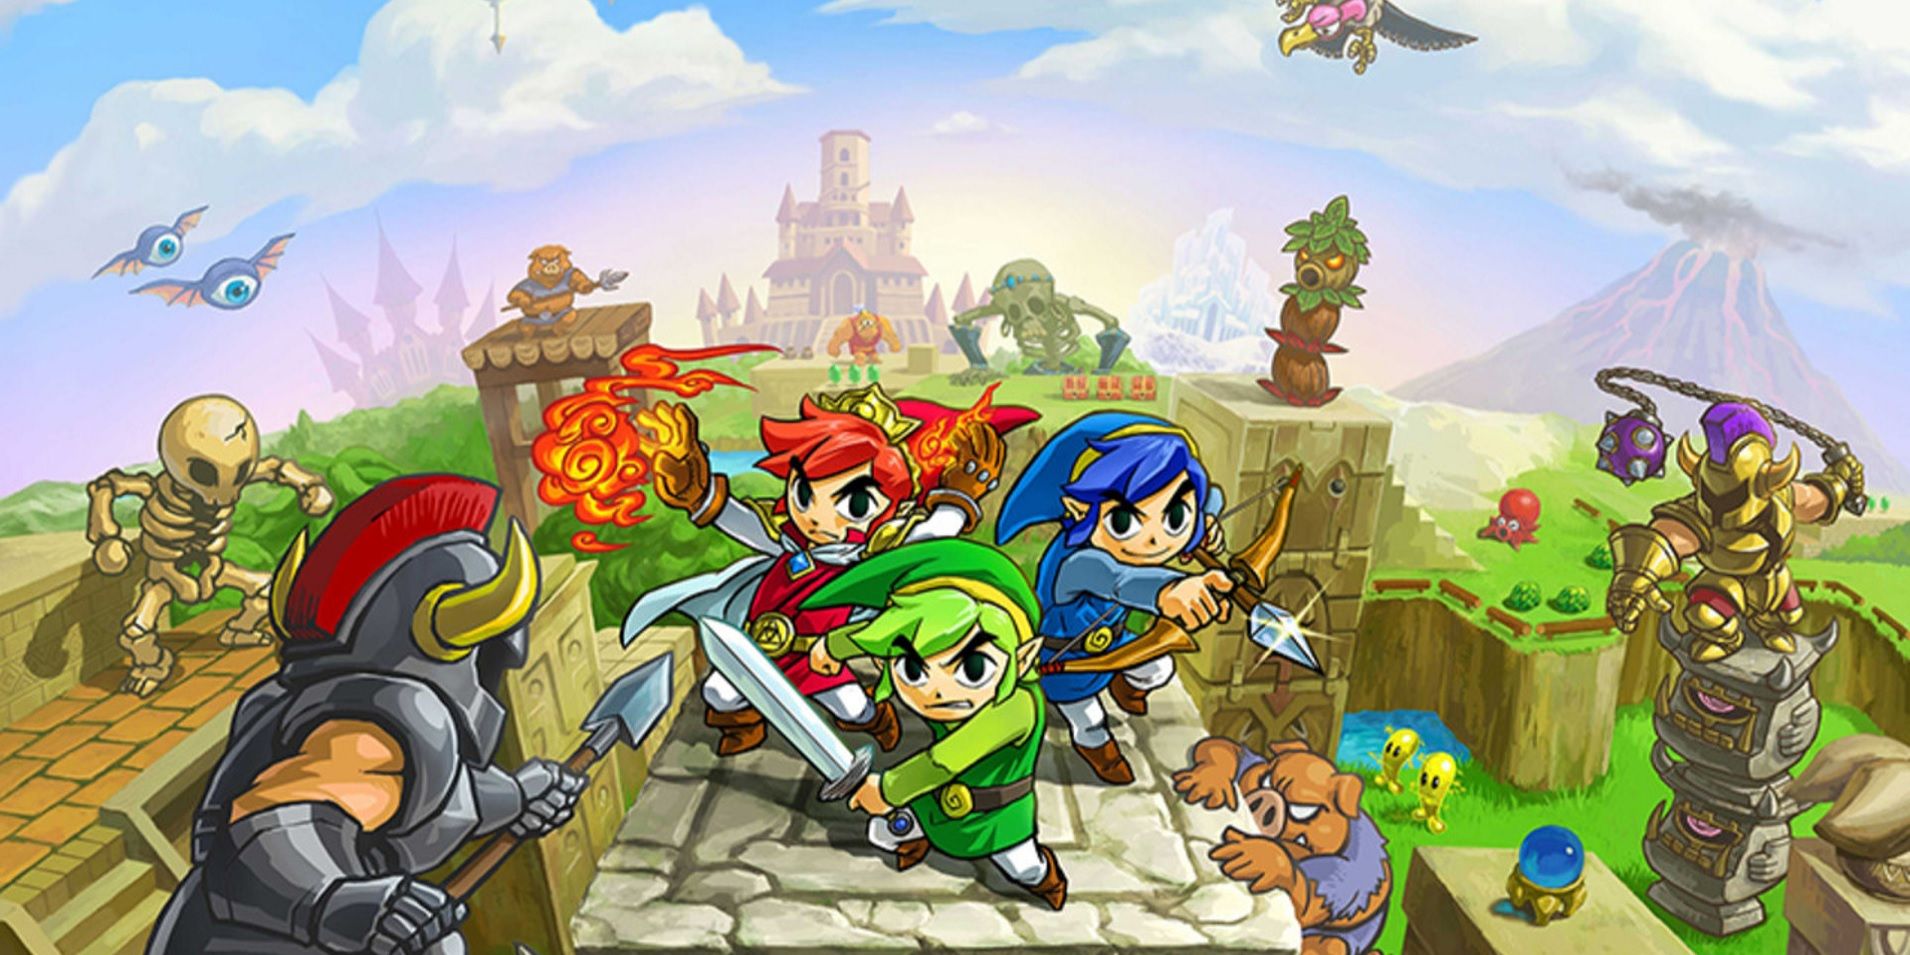 Triforce Heroes Cover Art With Three Links